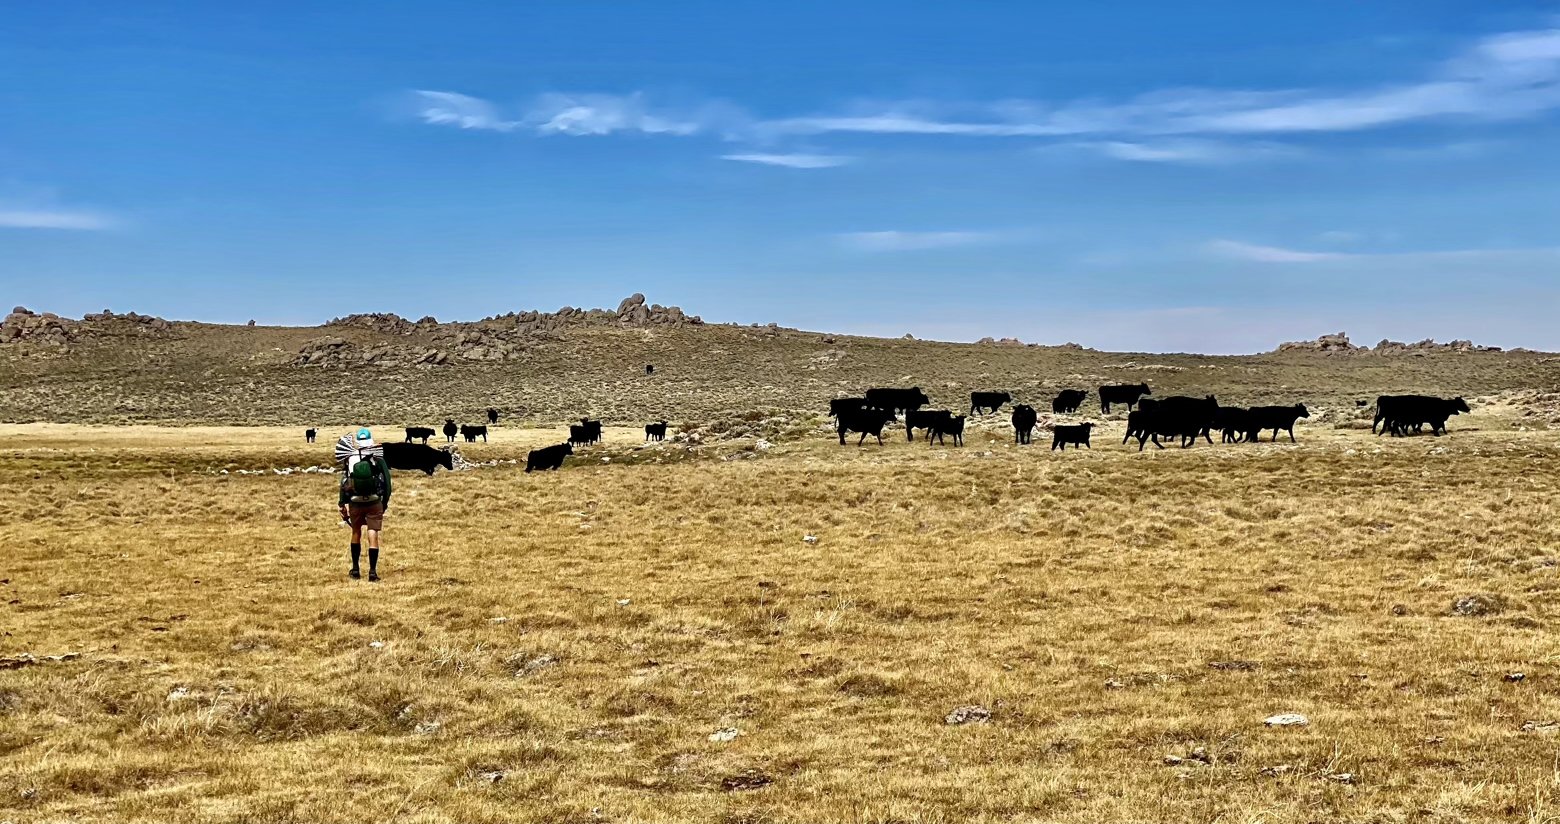 Asking the cows to share the water at Upper Mormon Spring